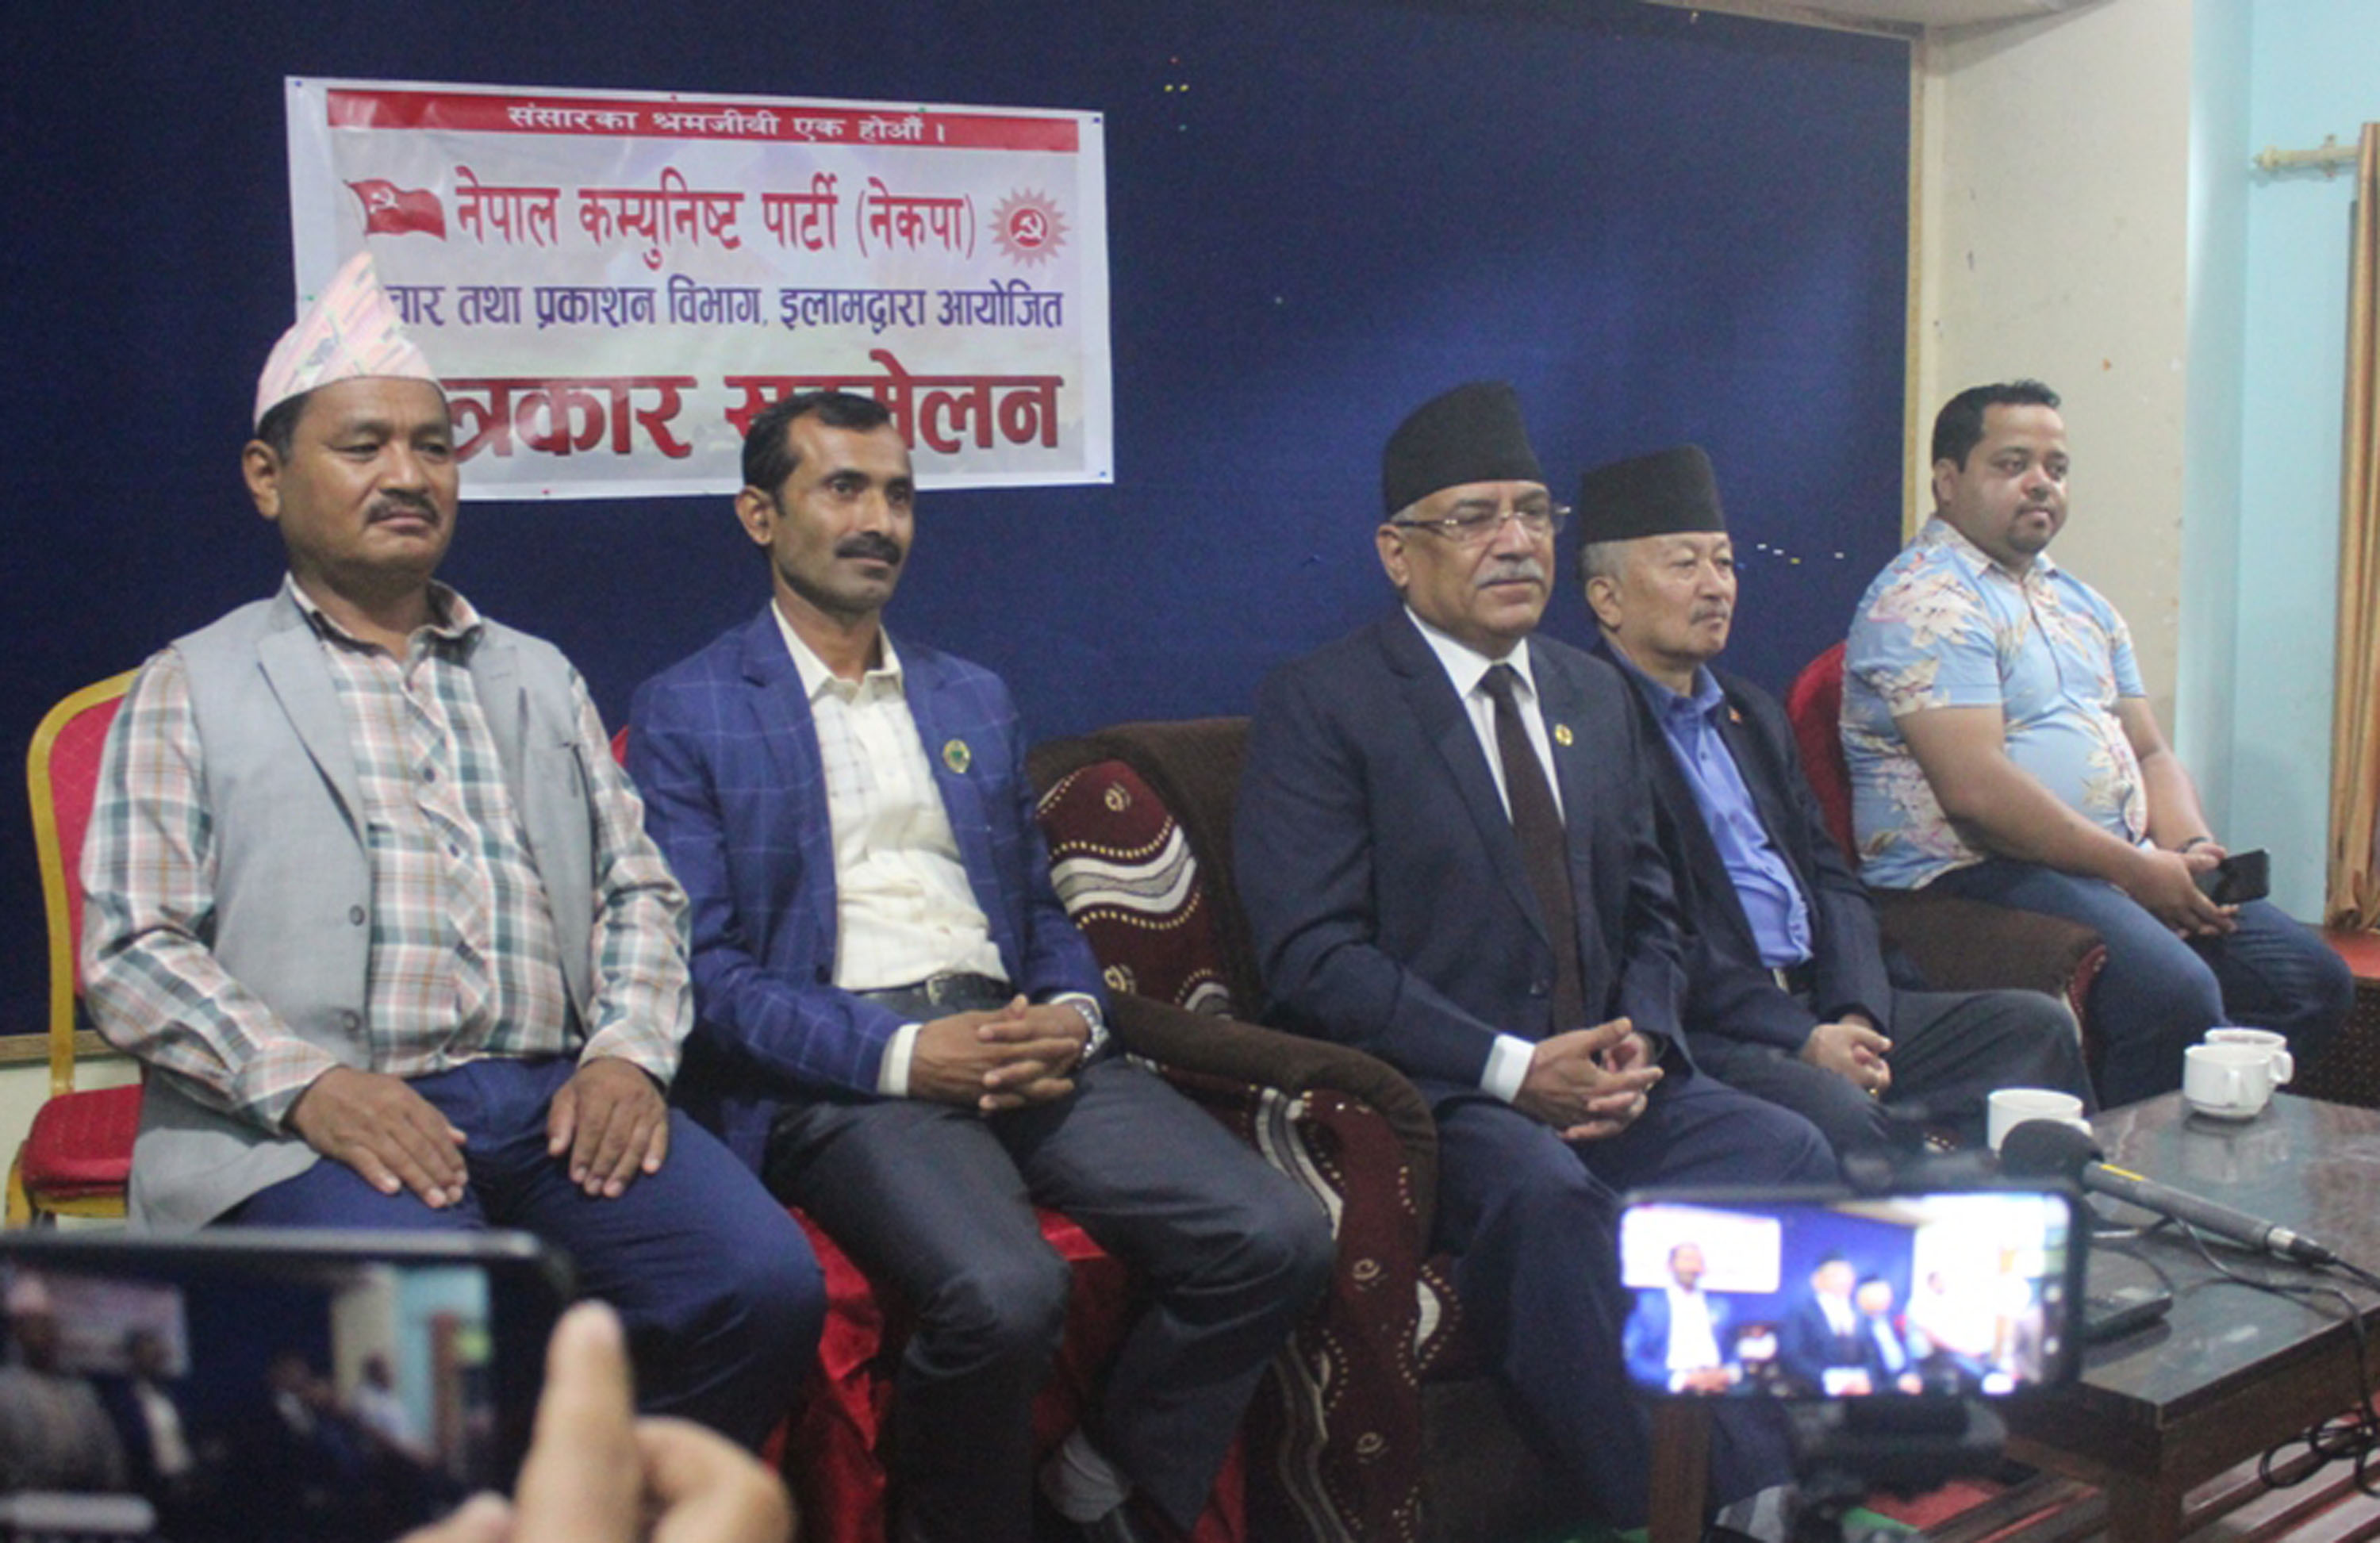 Dahal claims his view on Indo-Pacific Strategy misinterpreted